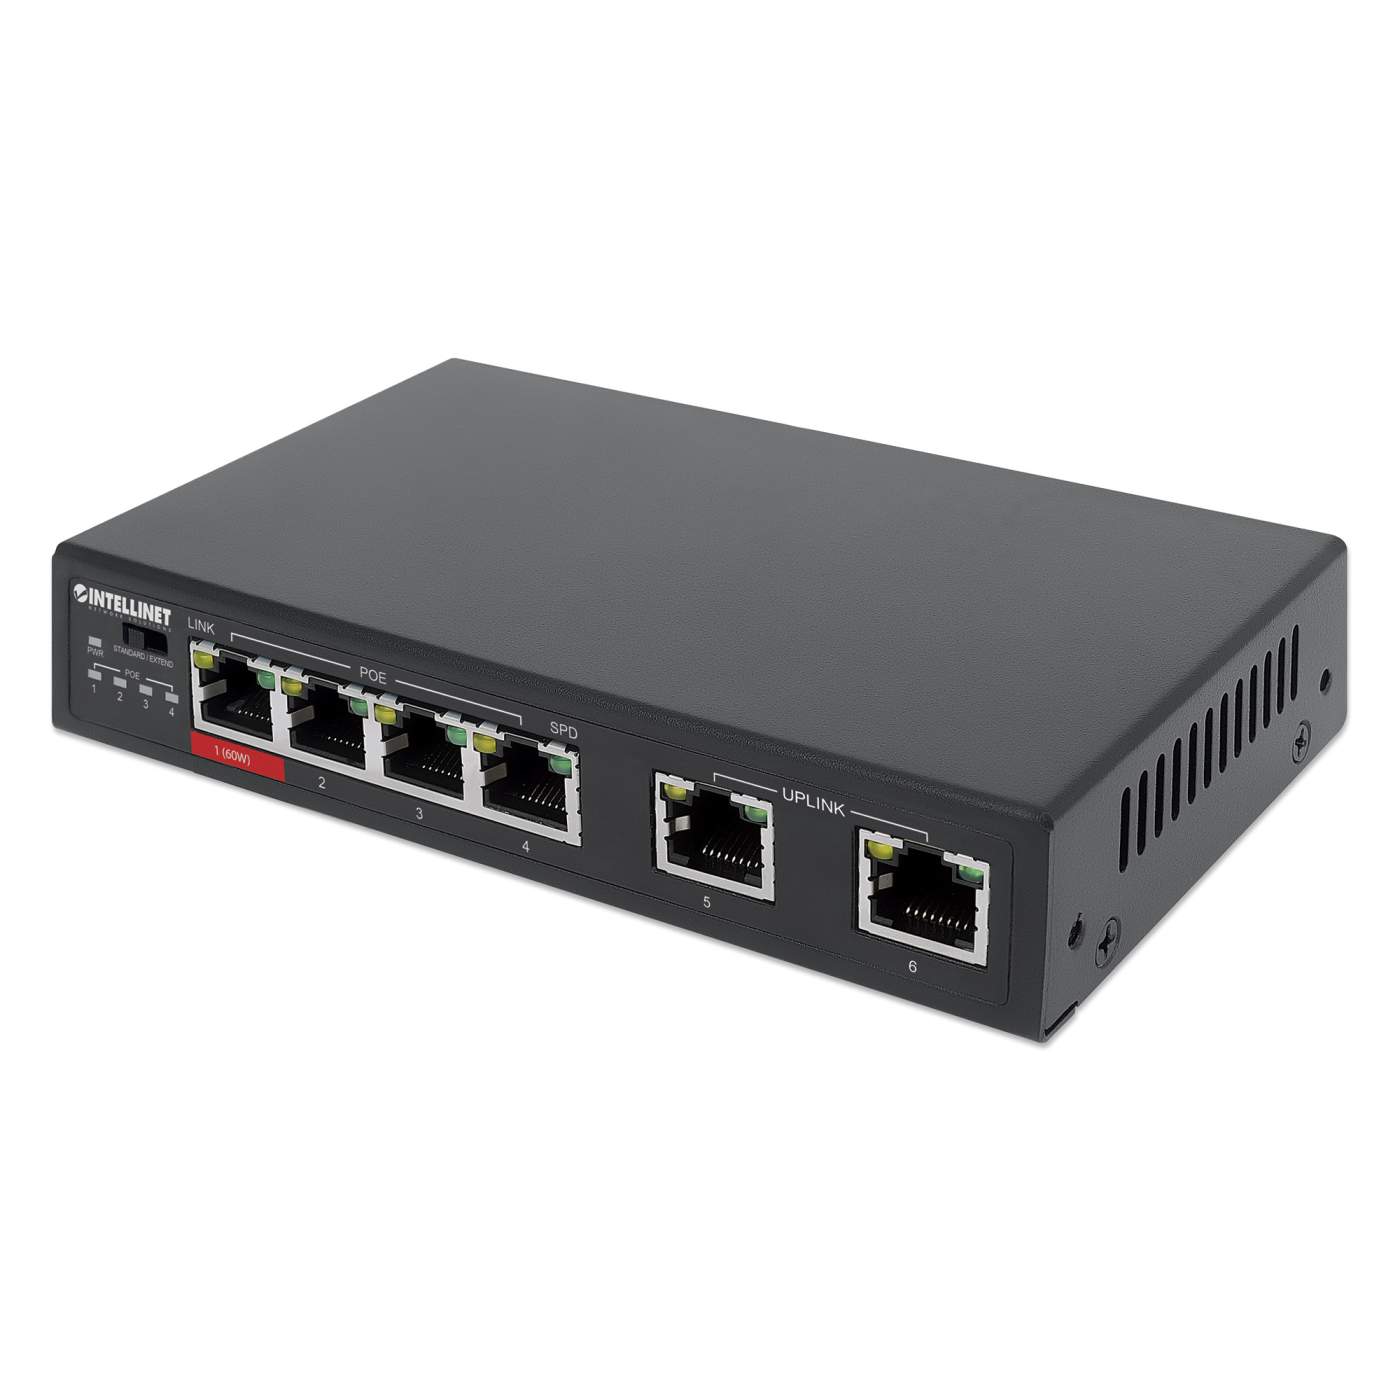 BV-Tech 6 Port PoE+ Switch (4 PoE+ Ports with 2 Ethernet Uplink and Extend  Function) – 60W – 802.3at + 1 High Power PoE Port| Desktop Fanless Design 